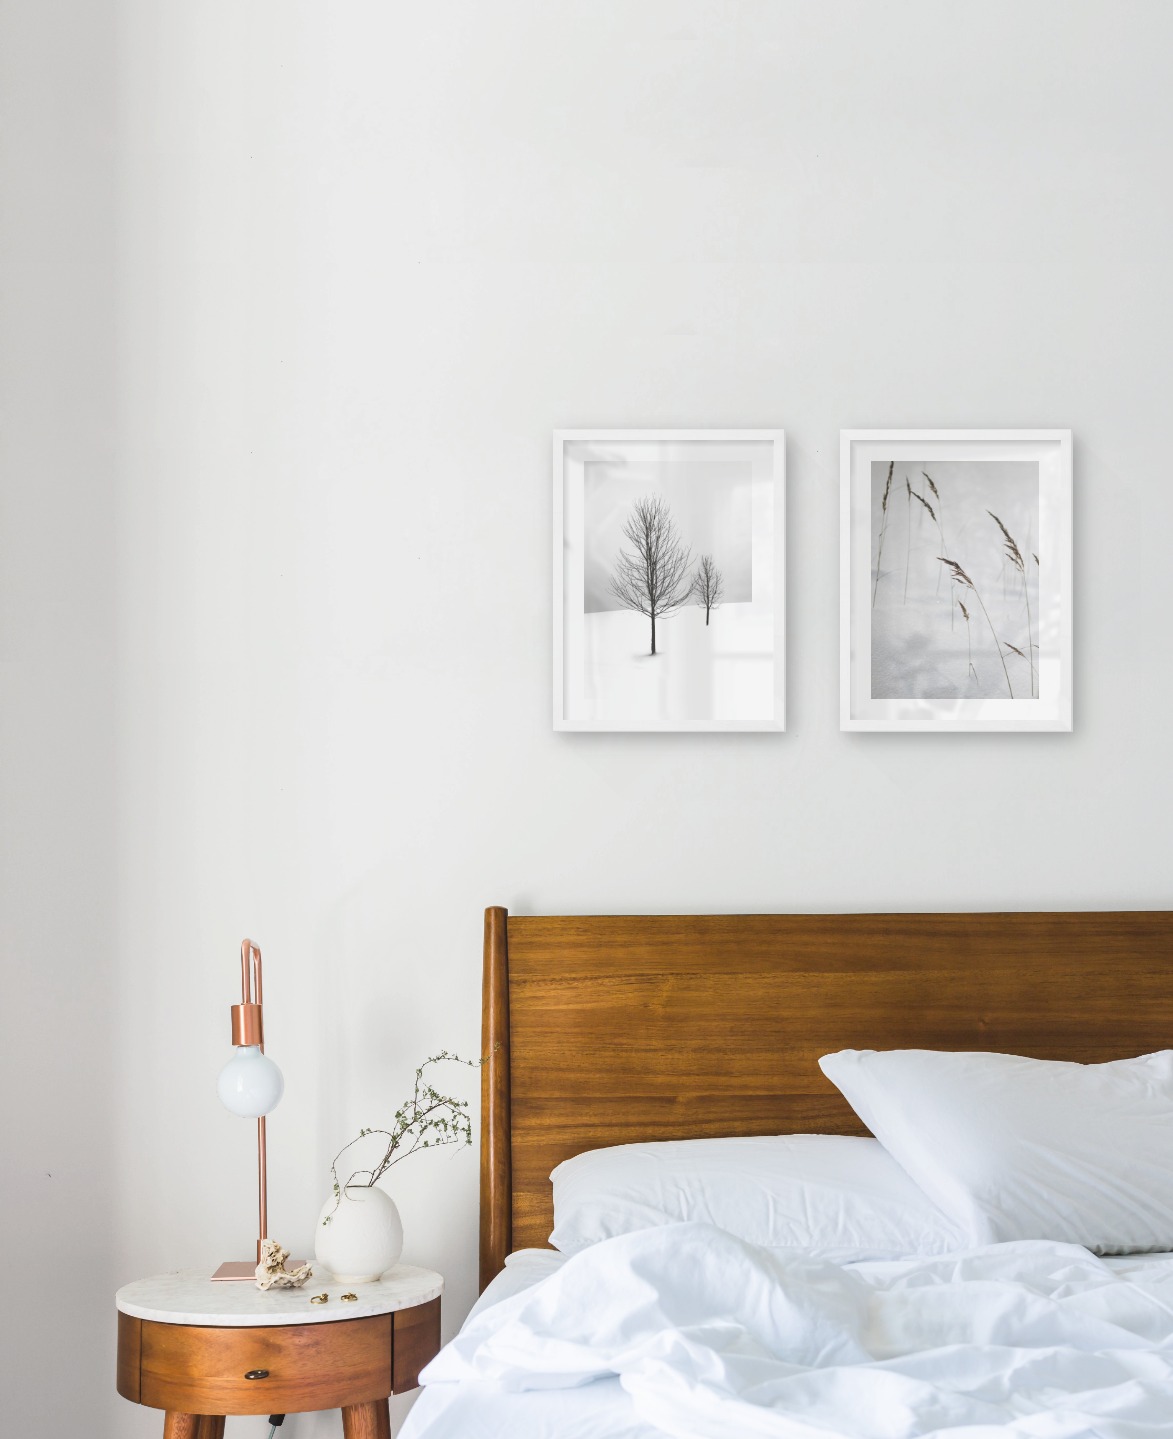 Gallery wall with picture frames in white in sizes 30x40 with prints "Trees in the snow" and "Sharp in the snow"